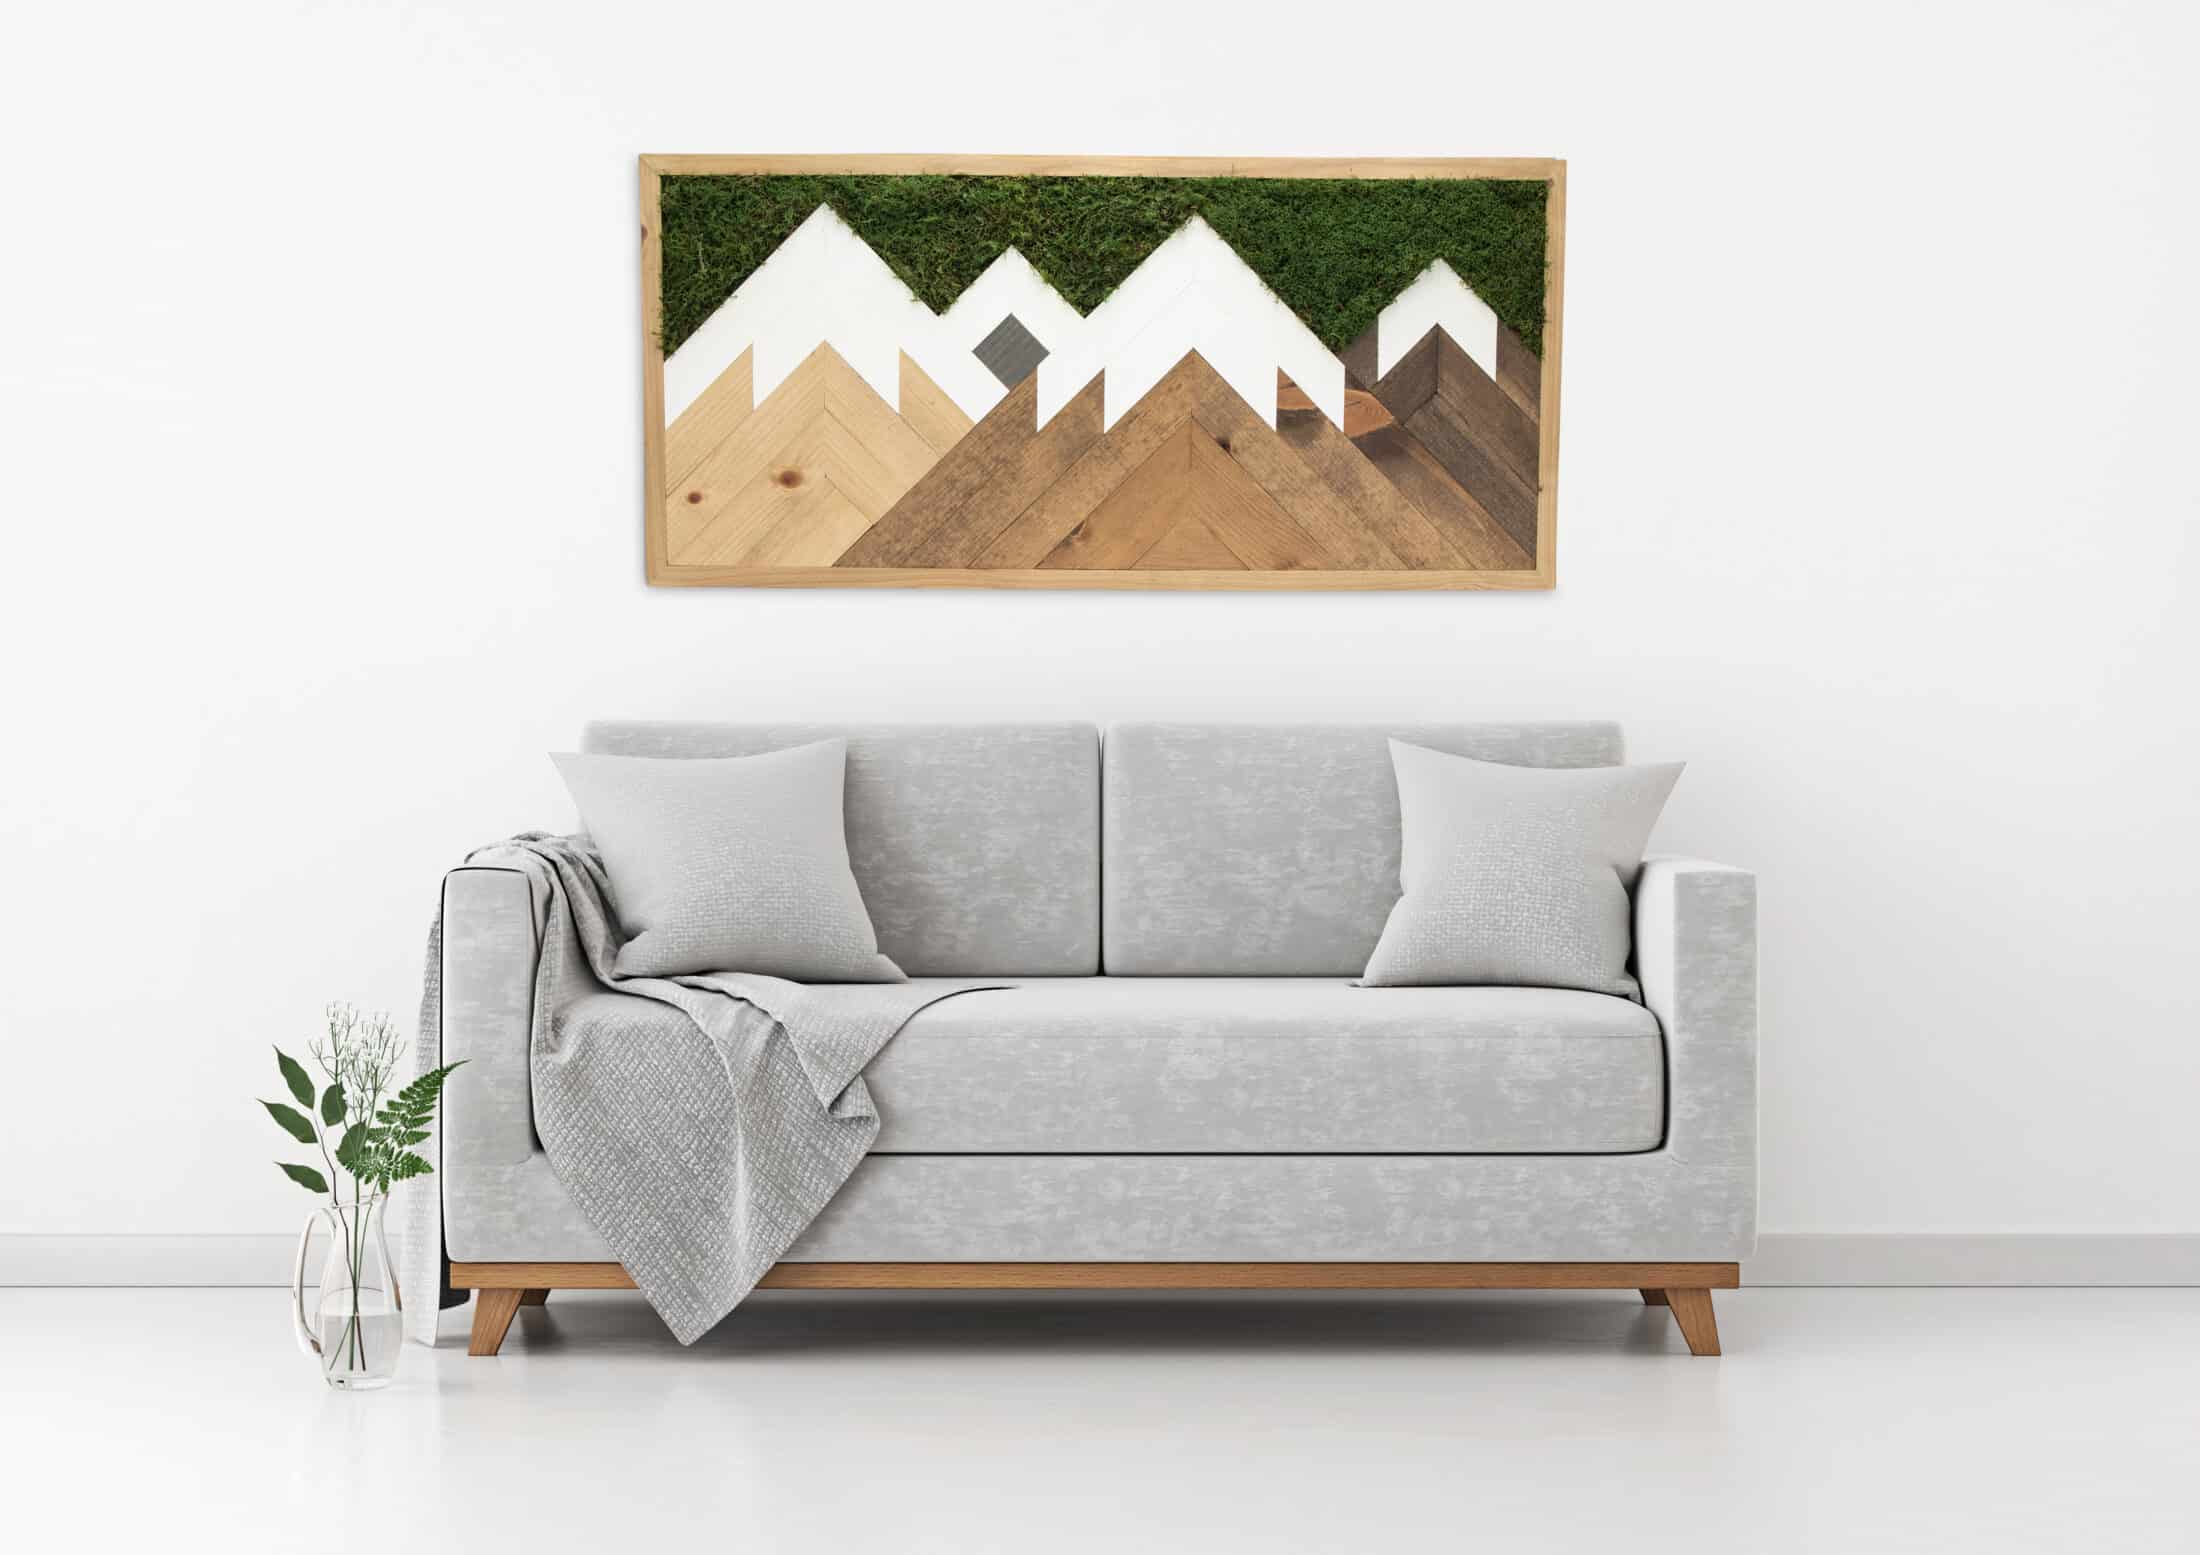 Living moss wall art that improves air quality and provides therapeutic relief from stress and anxiety. Moss wall art in home.